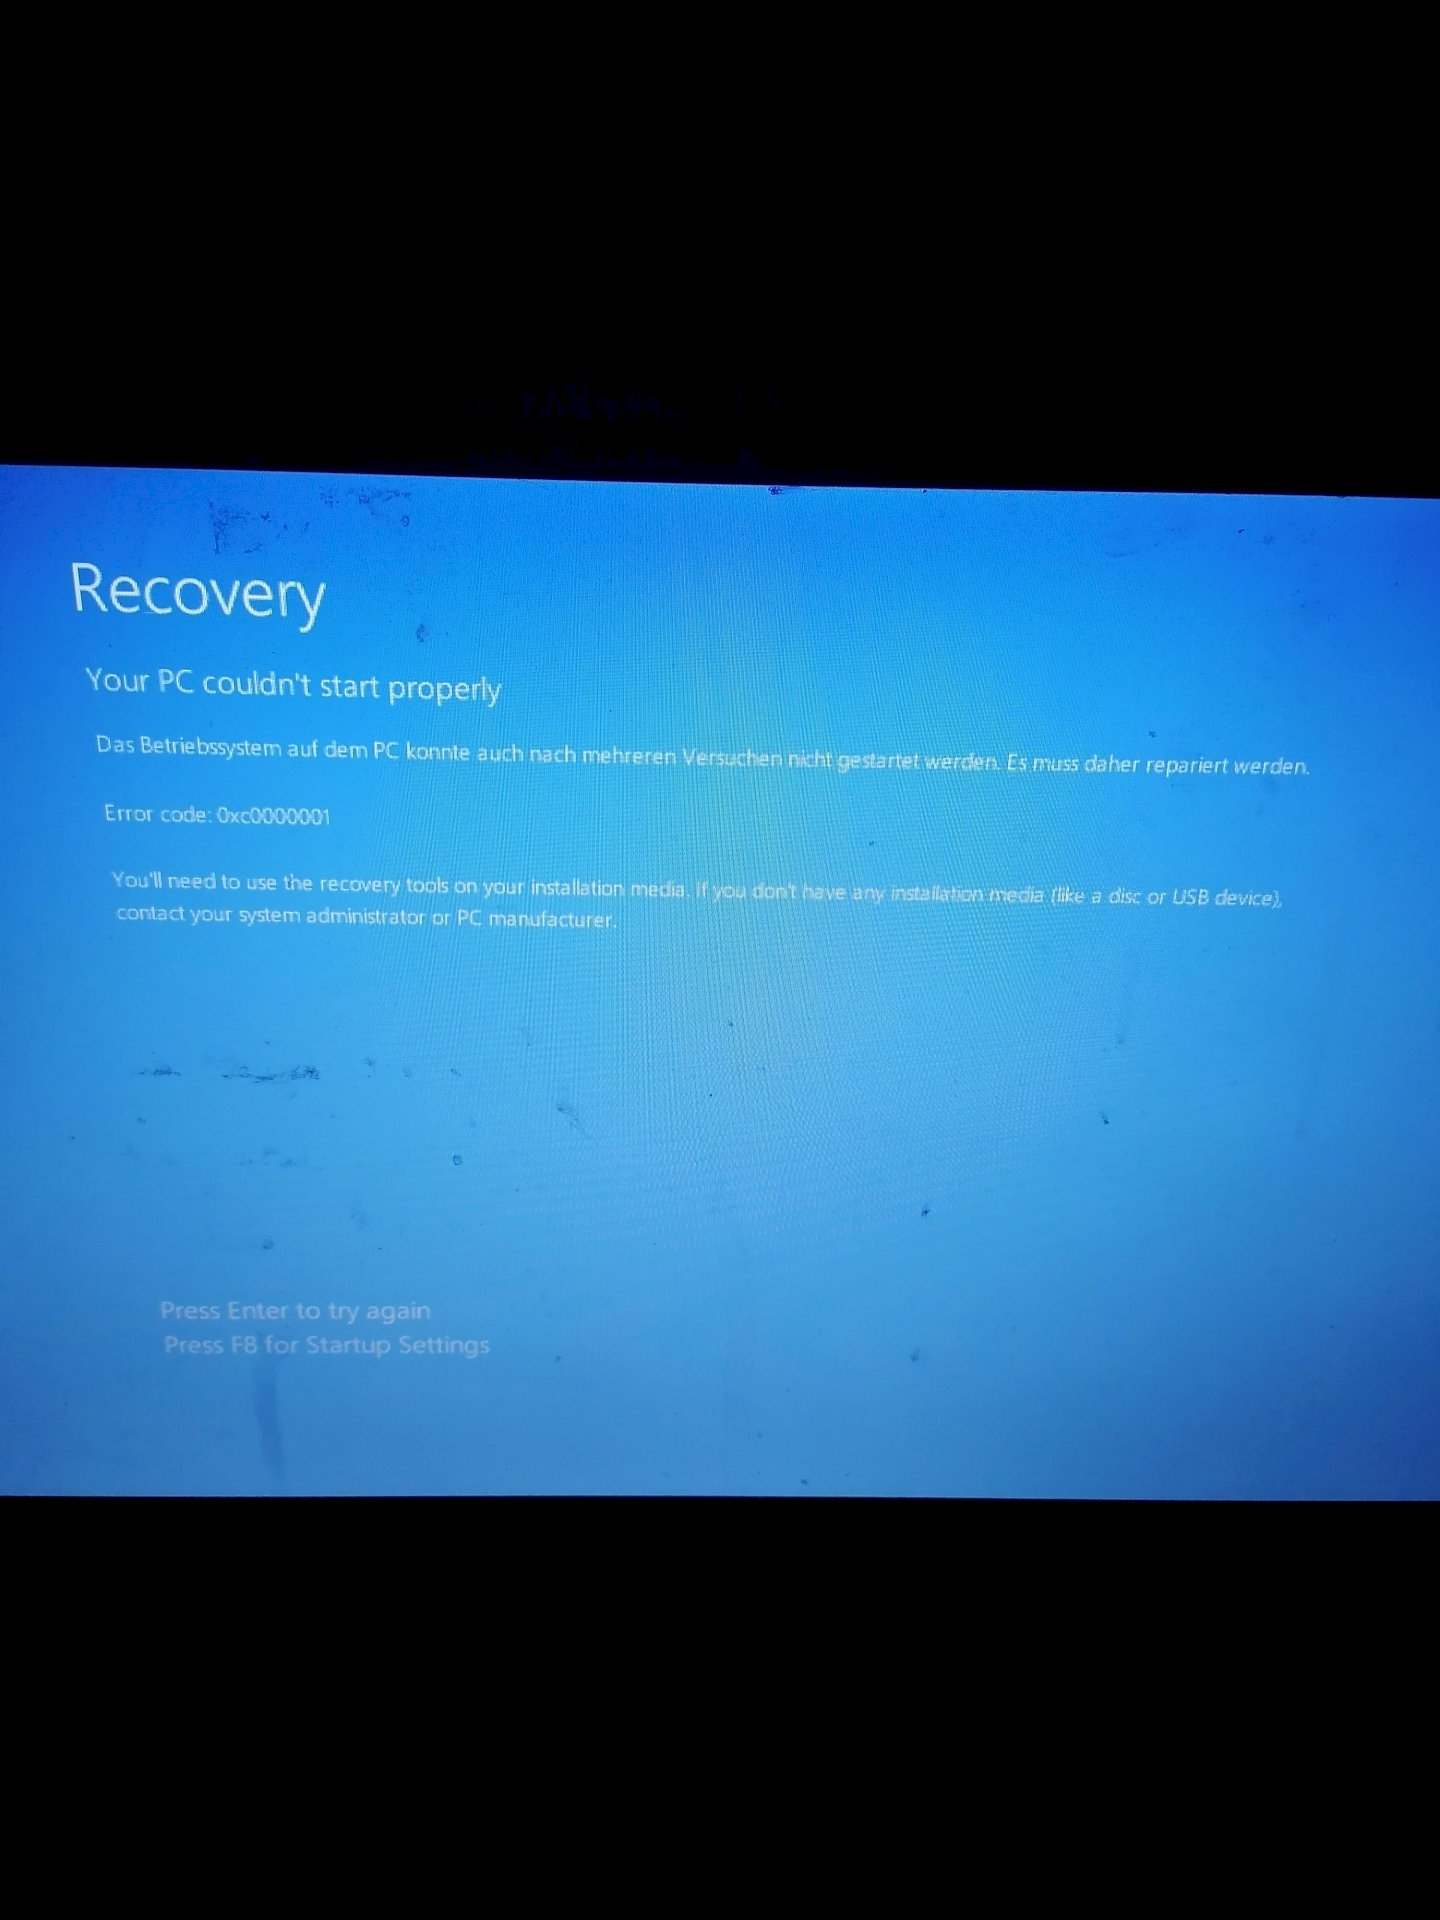 My laptop suddenly shows the recovery screen. What can I do